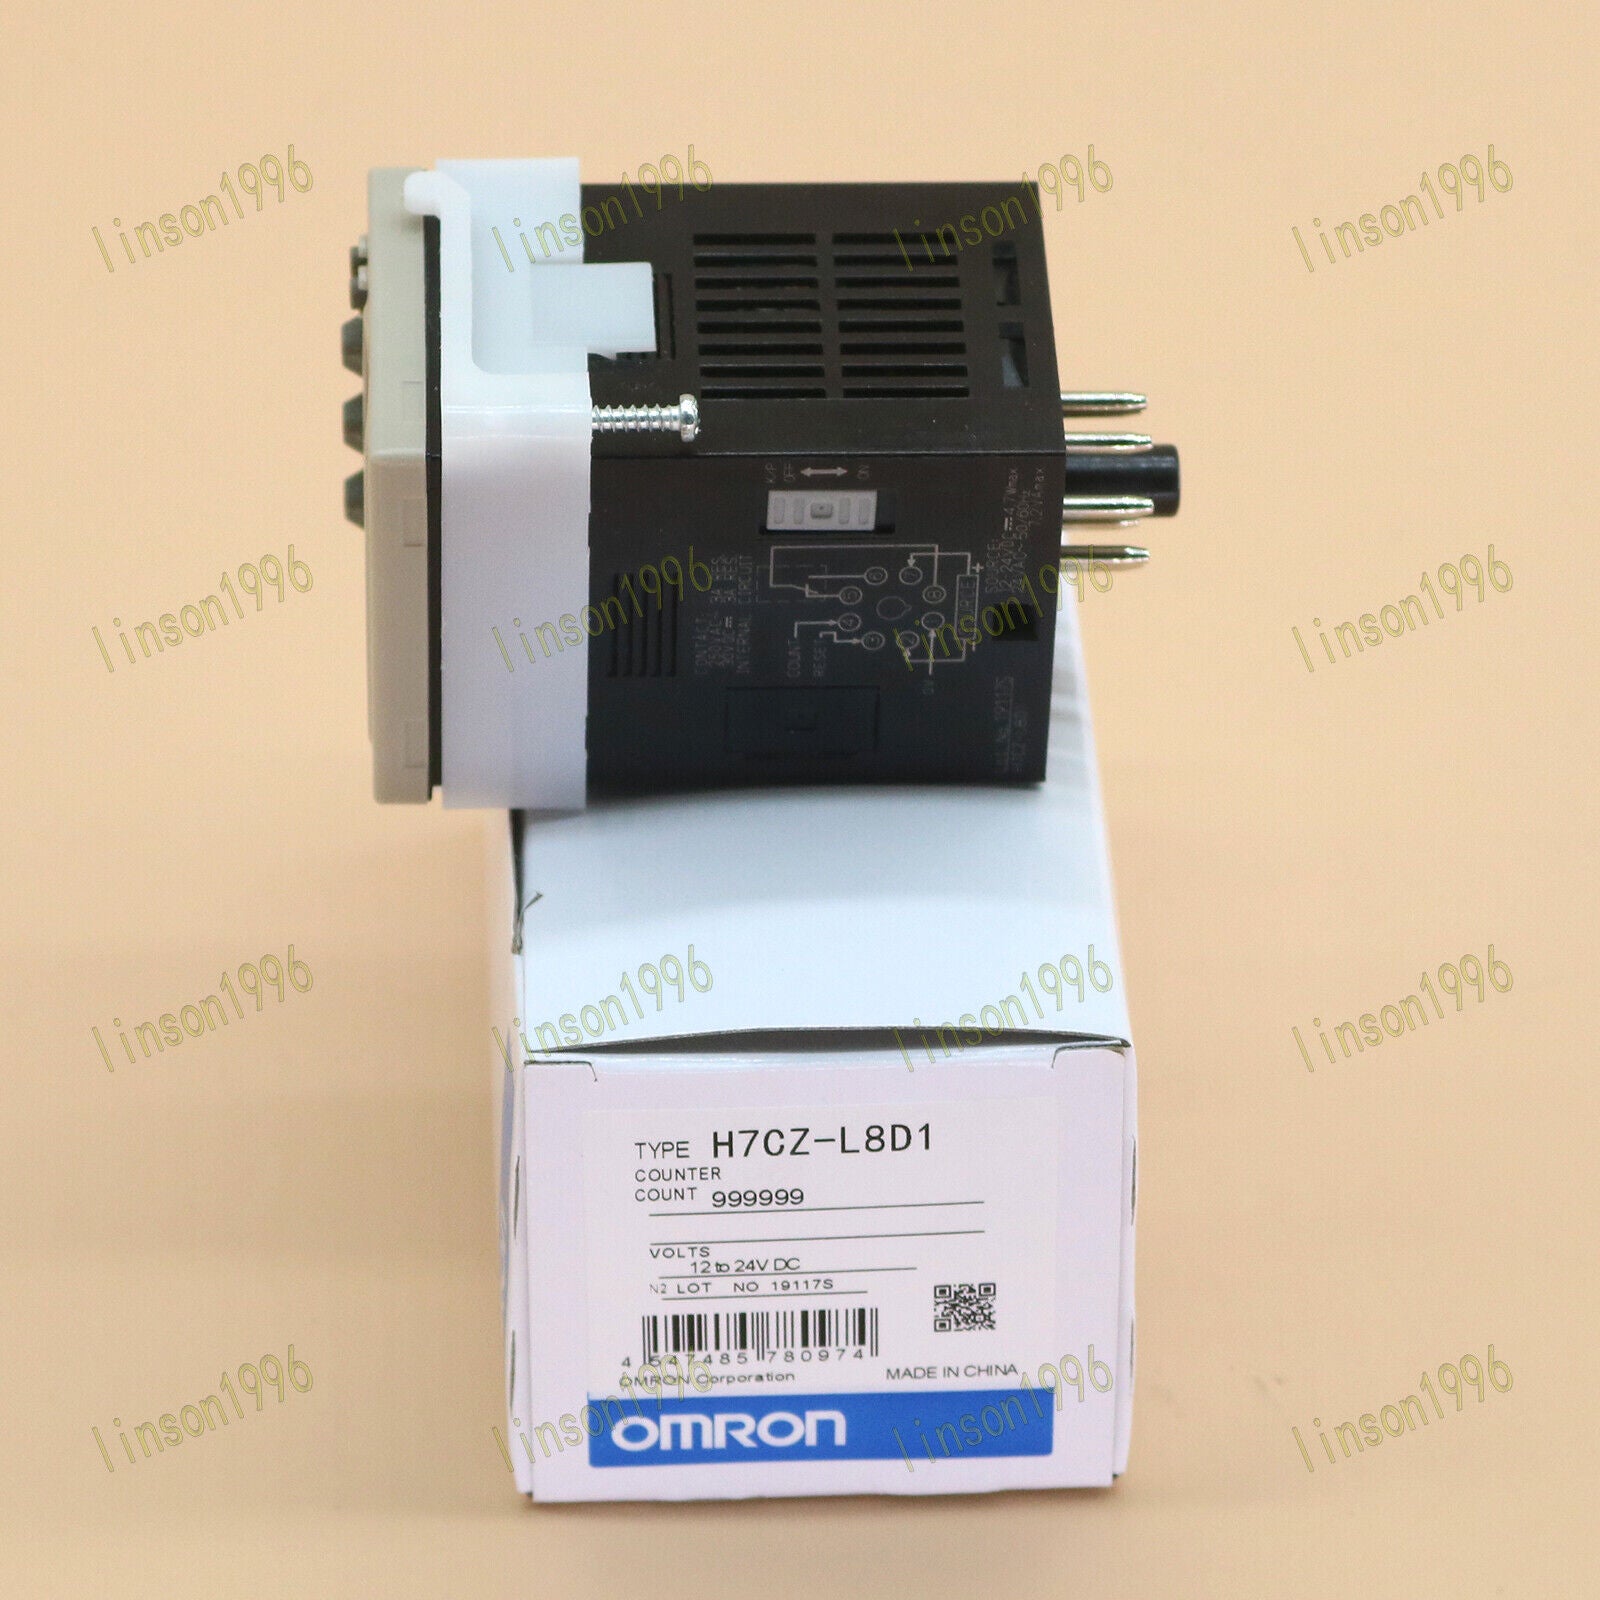 new  In Box Omron Counter H7CZ-L8D1